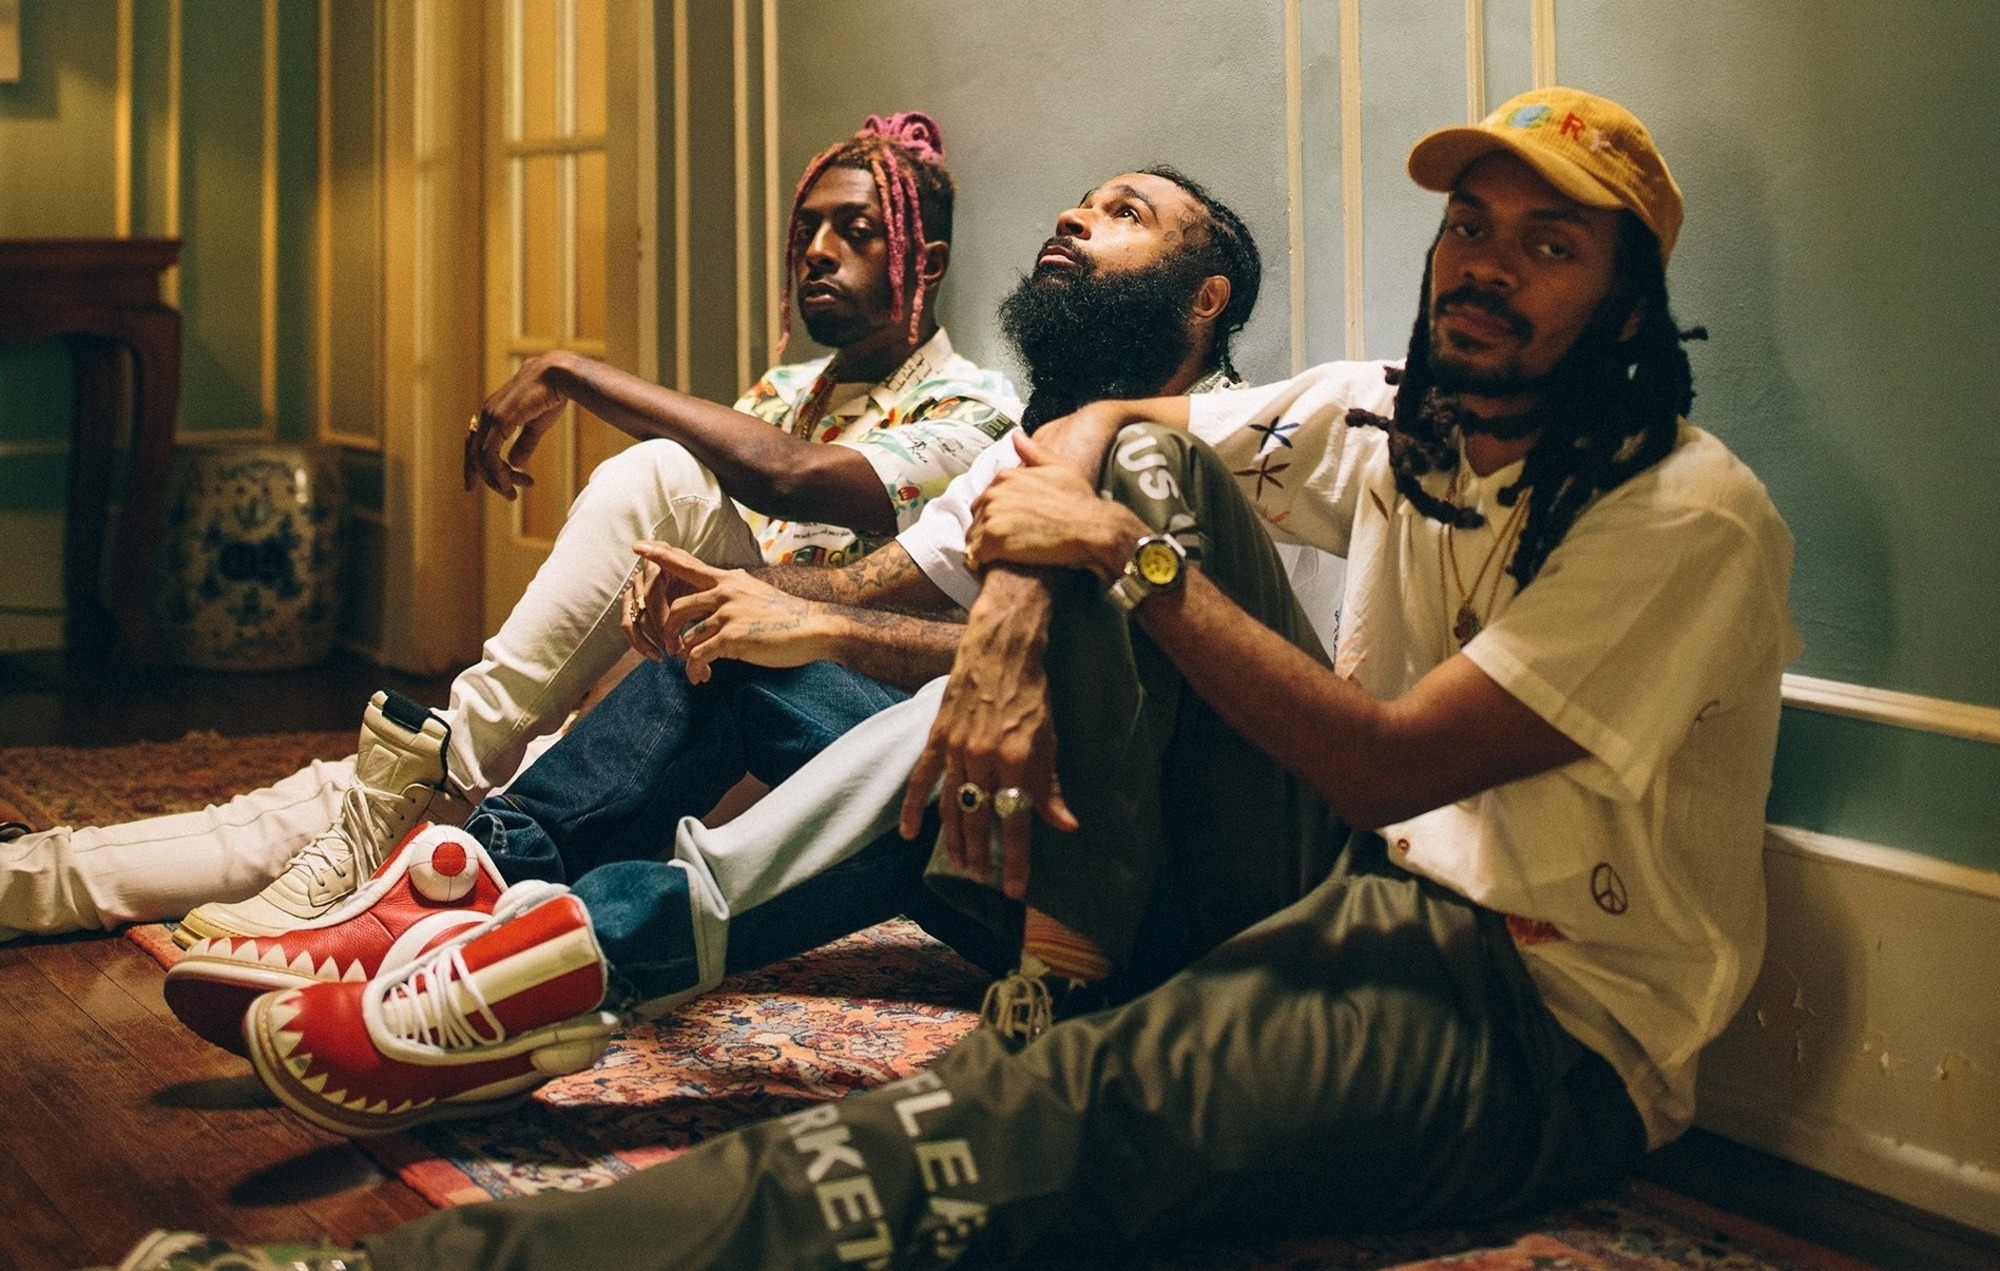 Flatbush Zombies: “Hip-hop is holding the opinions of outsiders way too high”